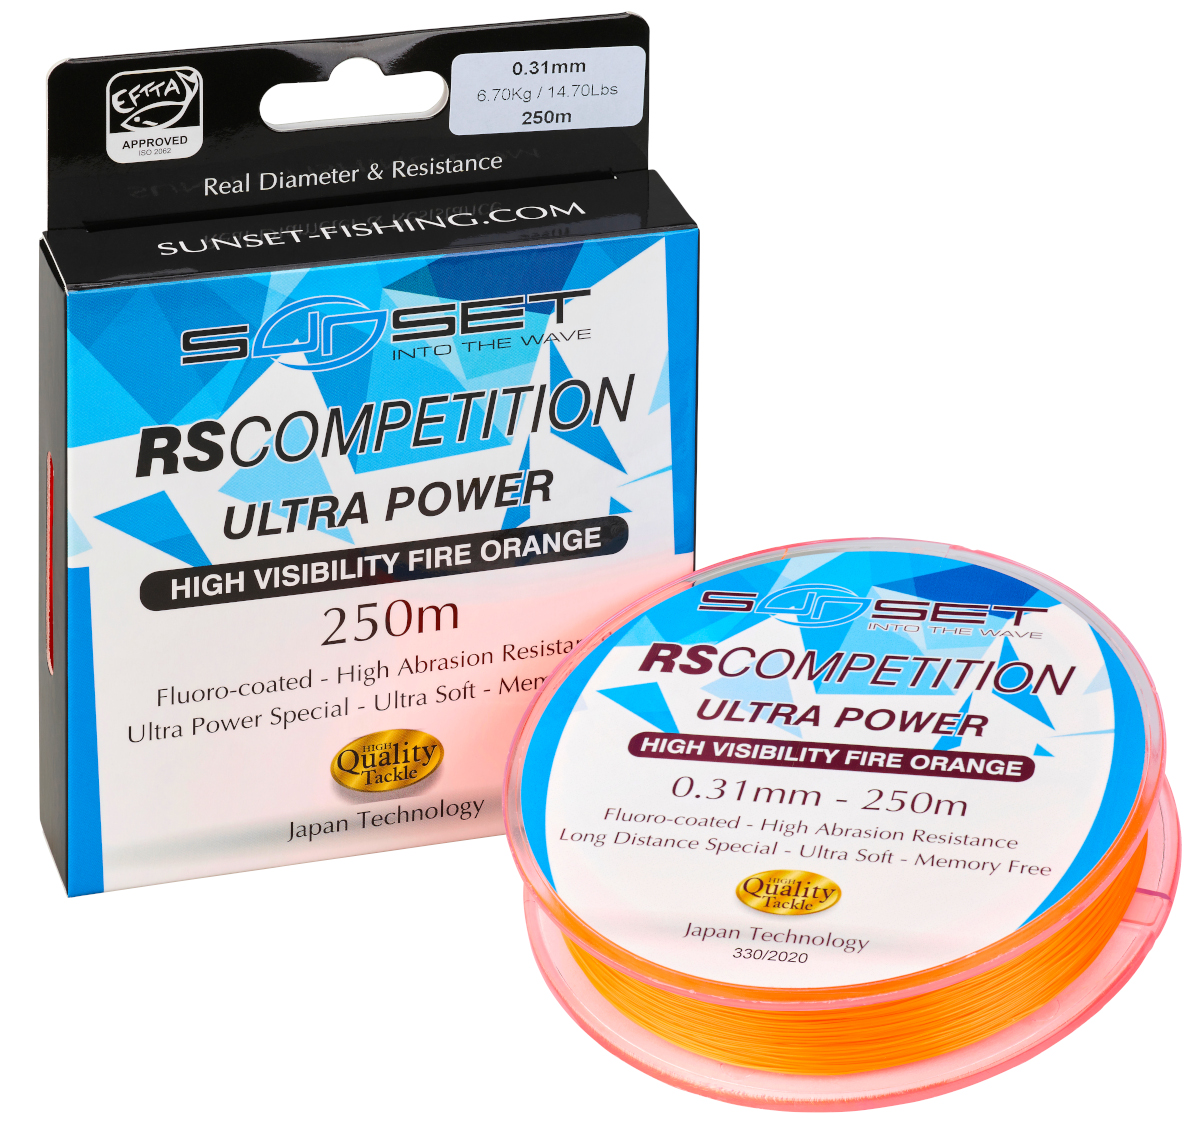 Sunset RS Competition Ultra Power Nylon Fishing Line 1000m